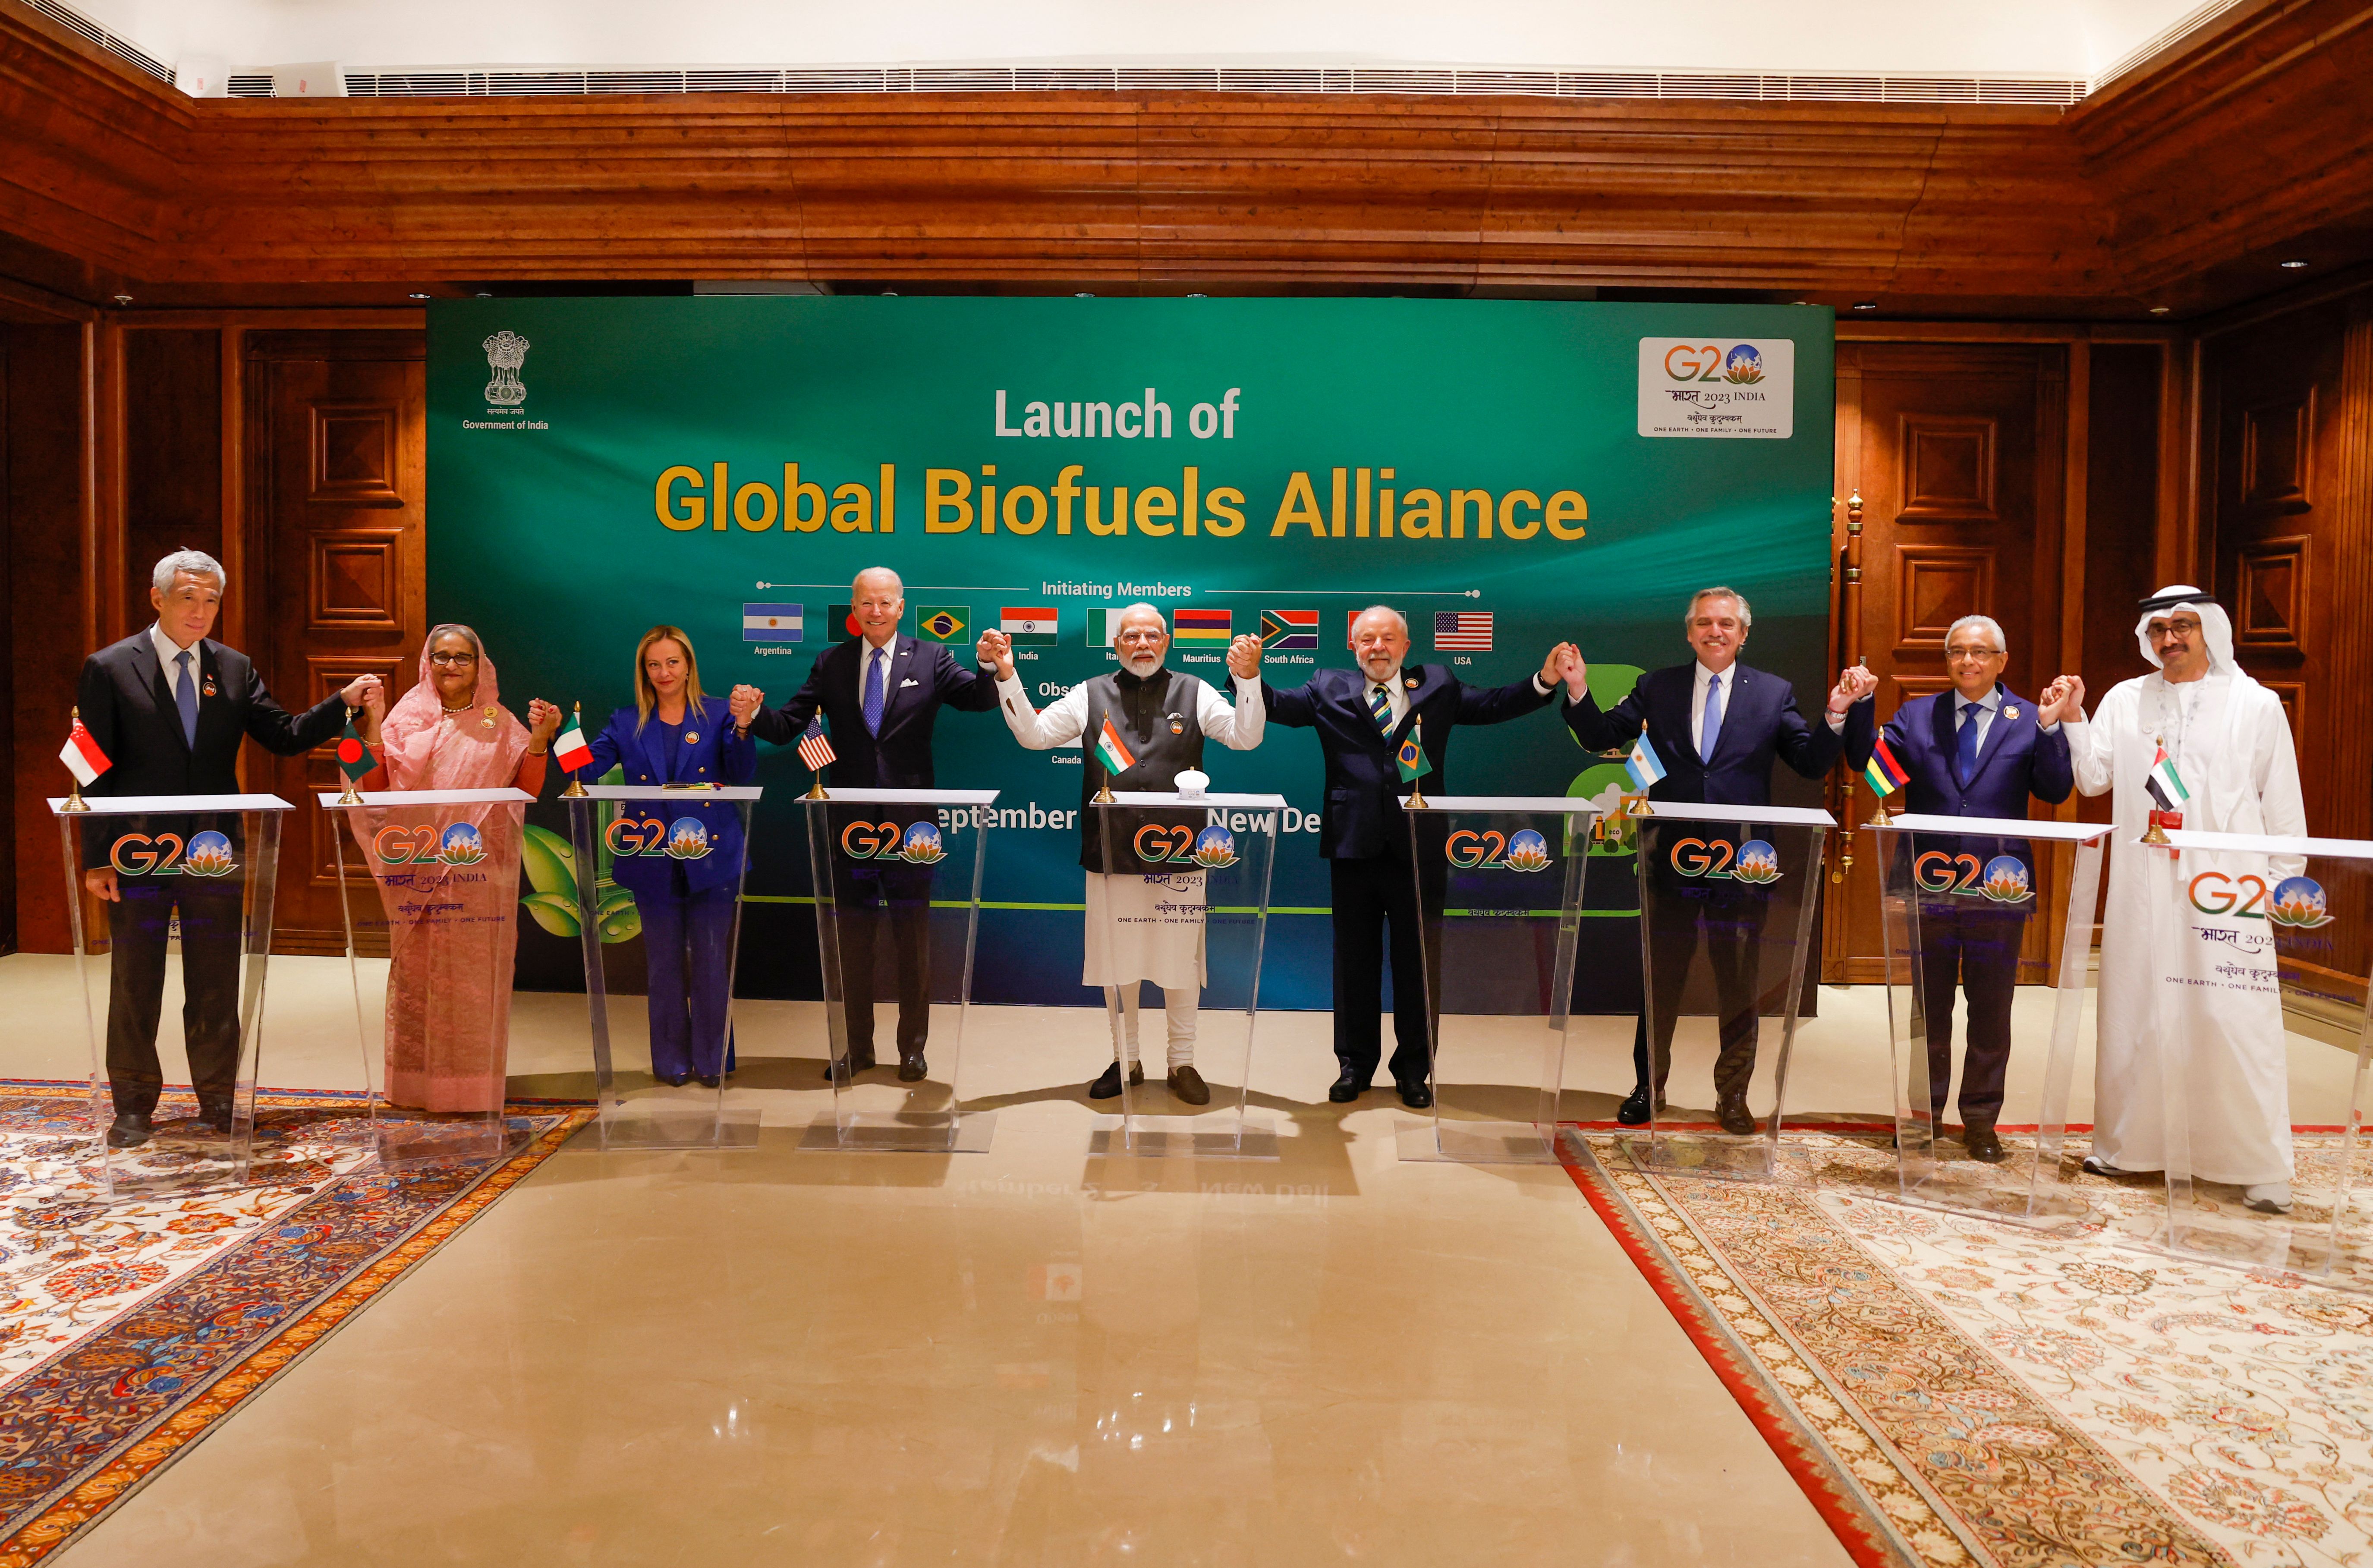 G20 leaders and guest countries leaders attend the launch of the Global Biofuels Alliance at the G20 Summit in New Delhi